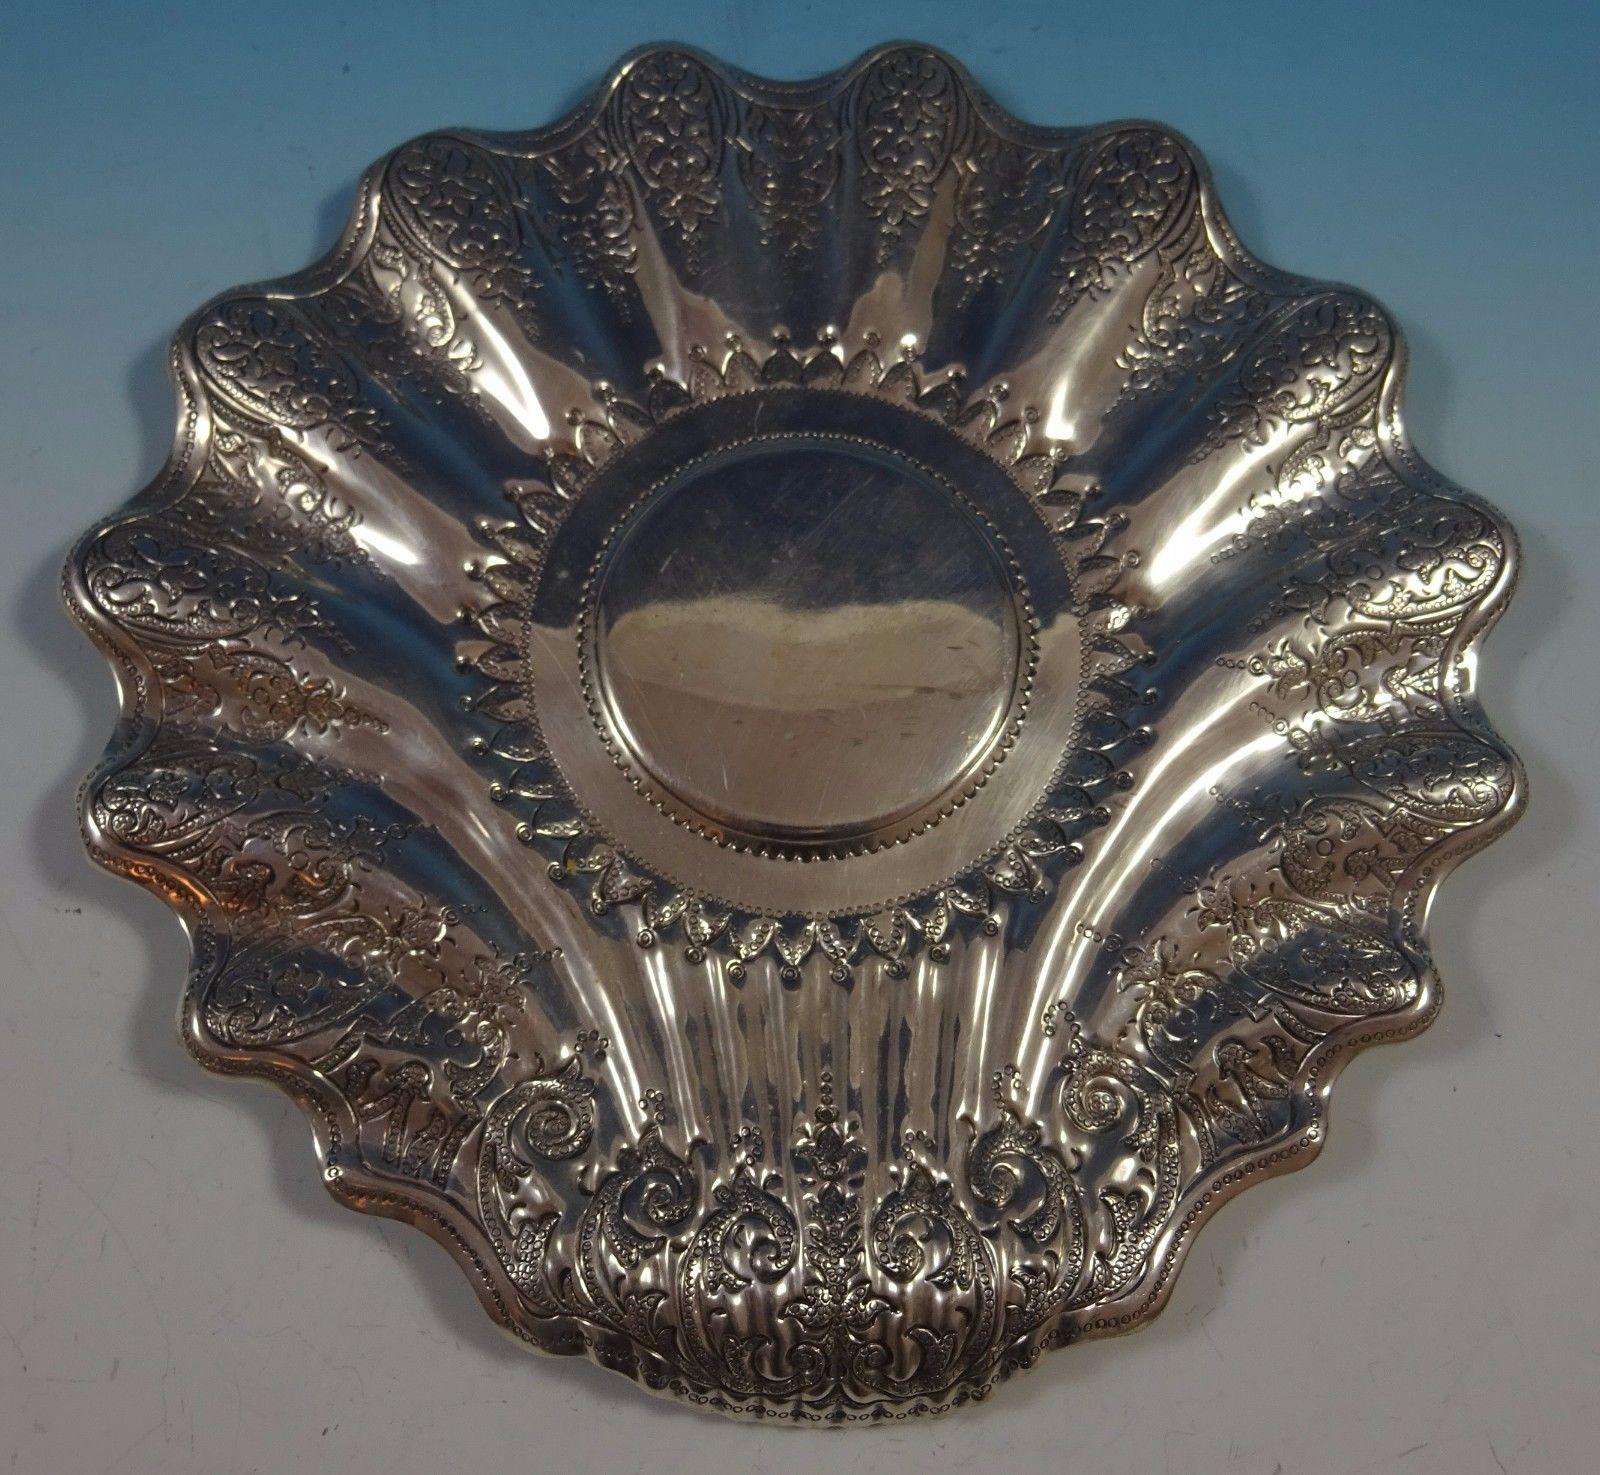 Marmalijo

Unique Mexican sterling silver dish made by Marmalijo in a shell shape. The dish has a beautiful engraved design. The piece measures 9